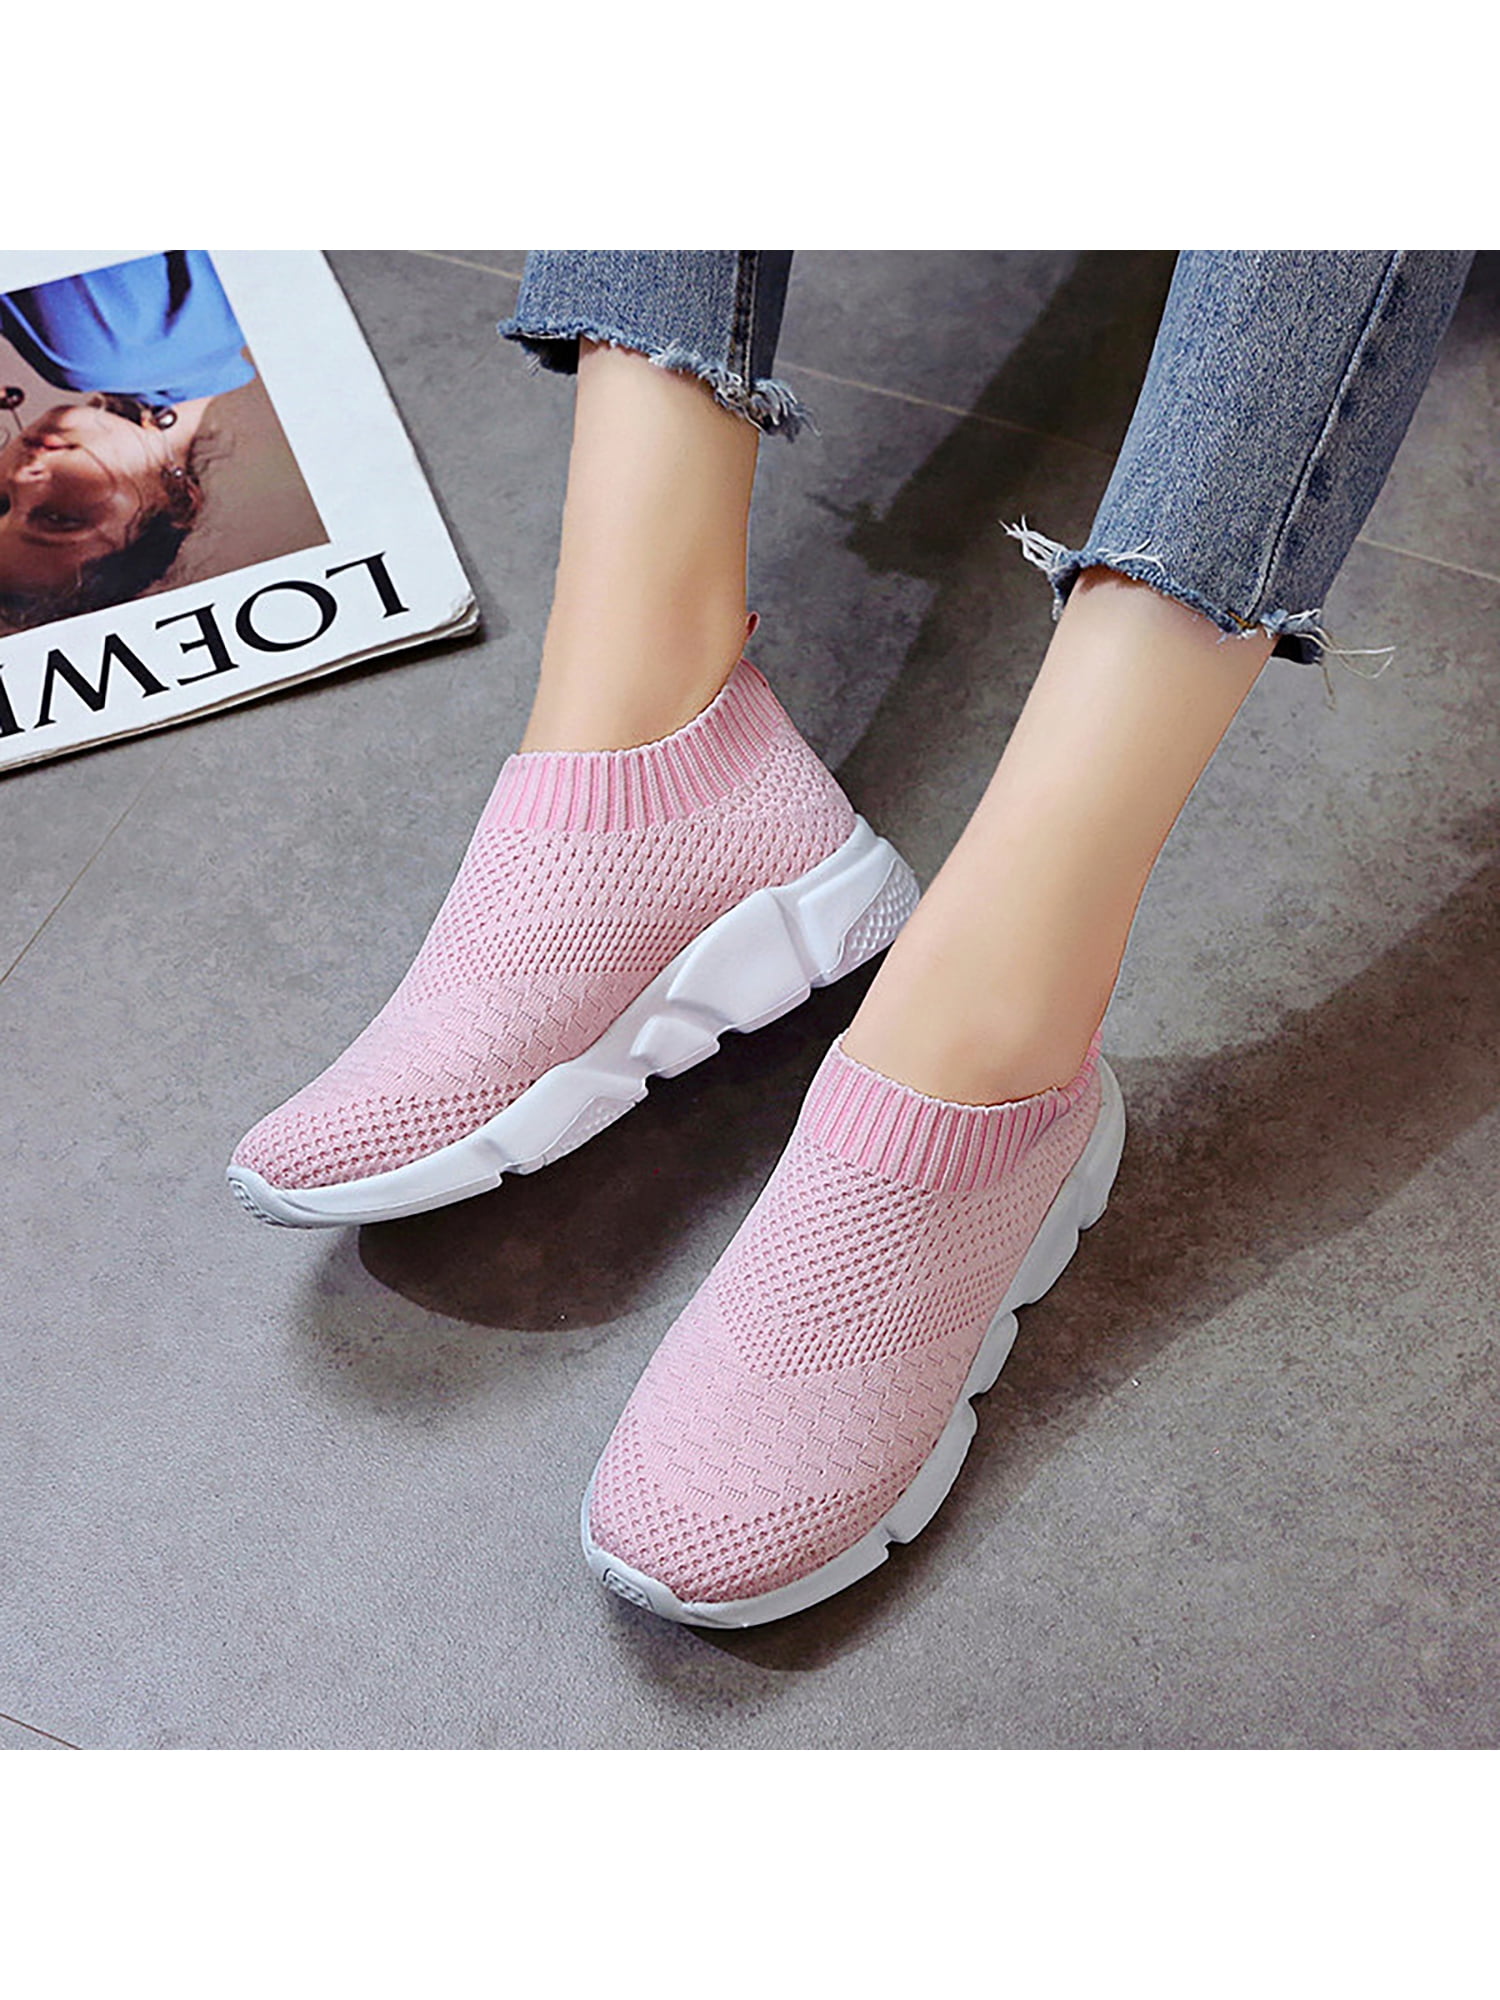 Women Running Outdoor Tennis Sneakers Sports Casual Walking Shoes Gym Size Pink